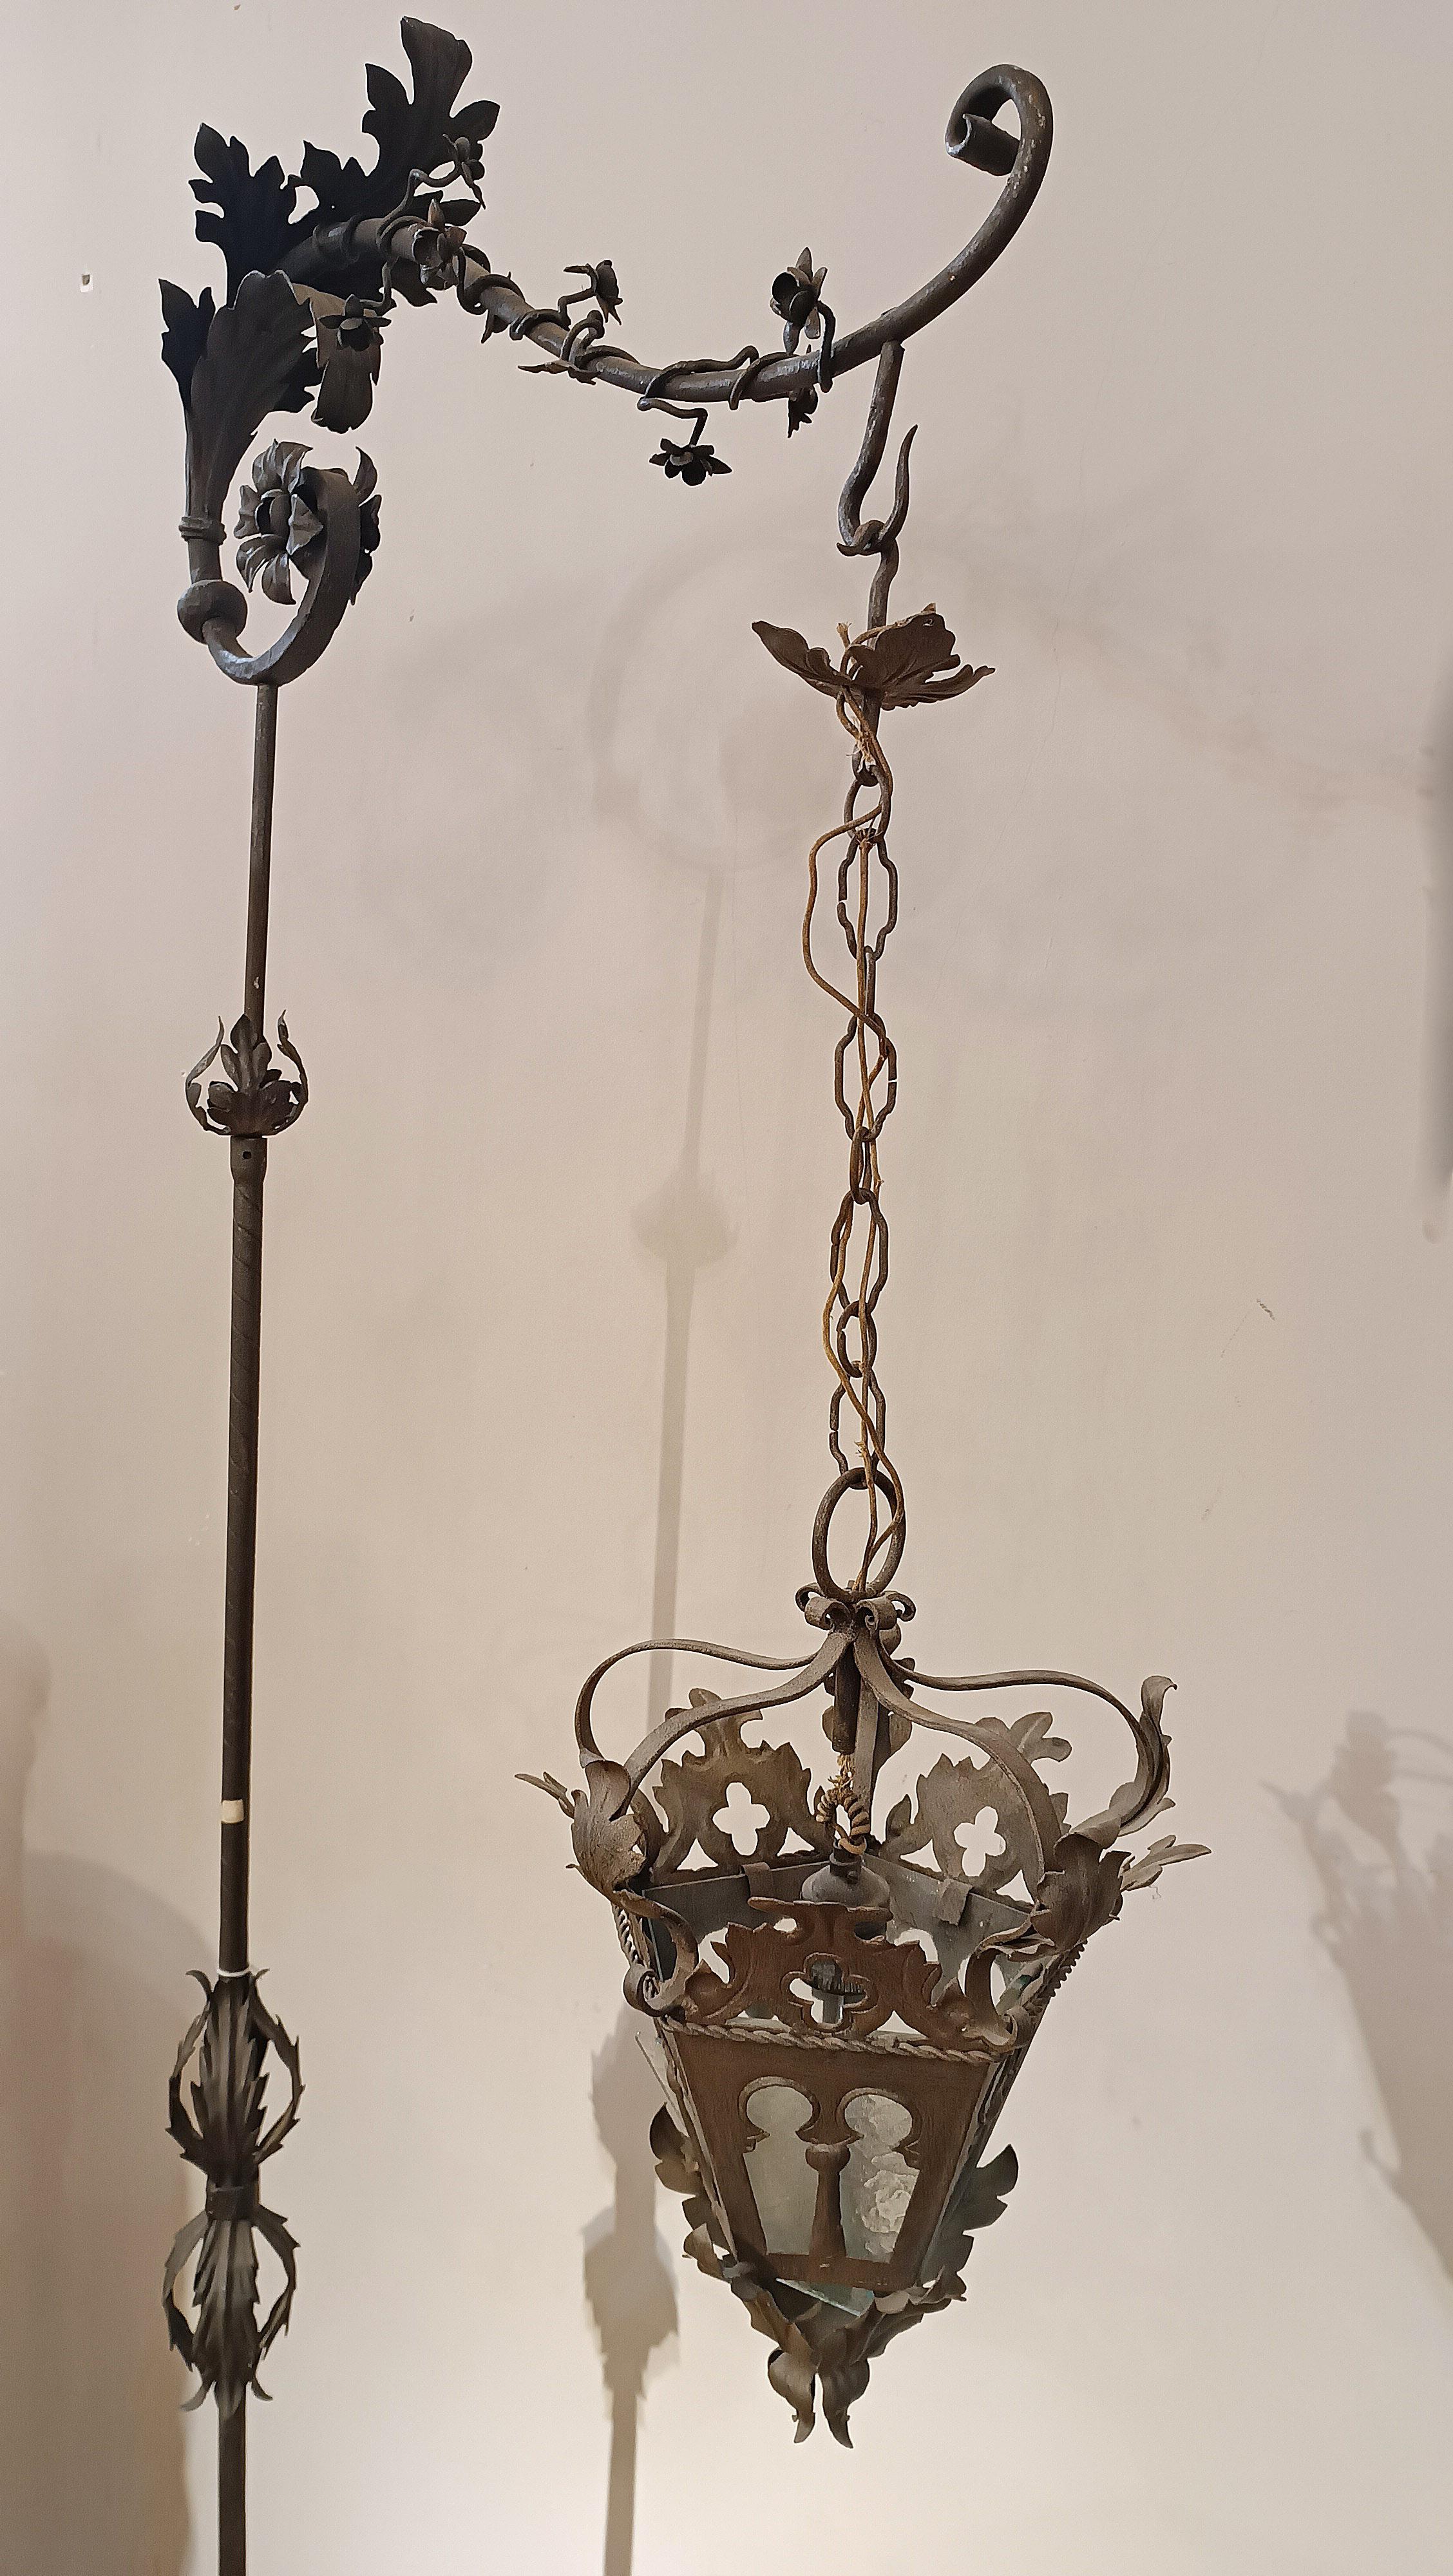 Hand-Crafted END OF THE 19th CENTURY IRON LANTERN HOLDER For Sale